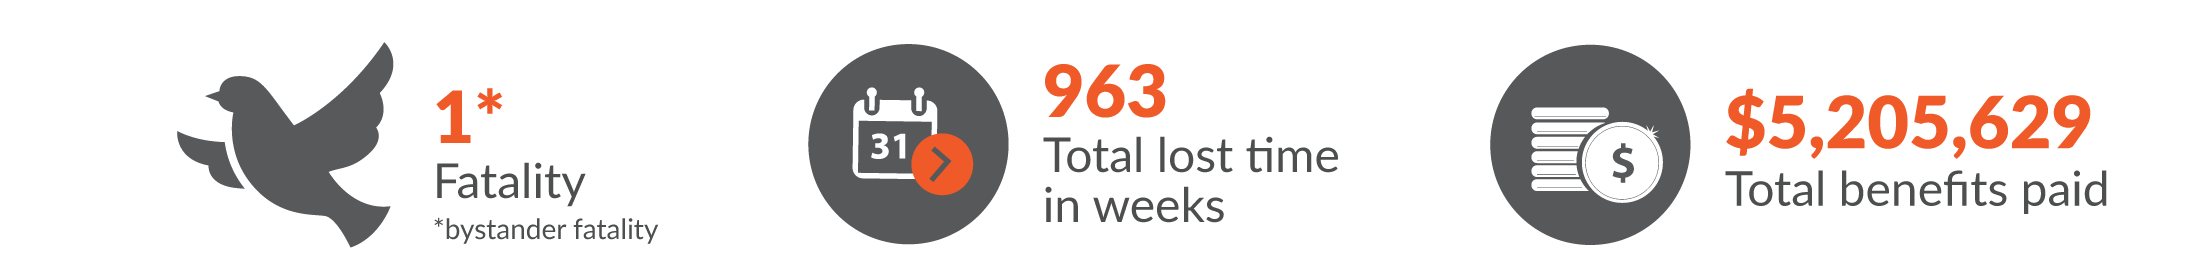 This infographic shows there was one work-related fatality in Health and Community Services and the total workers compensation claims resulted in 963 total lost time in weeks and $5,205,629 was paid in benefits.